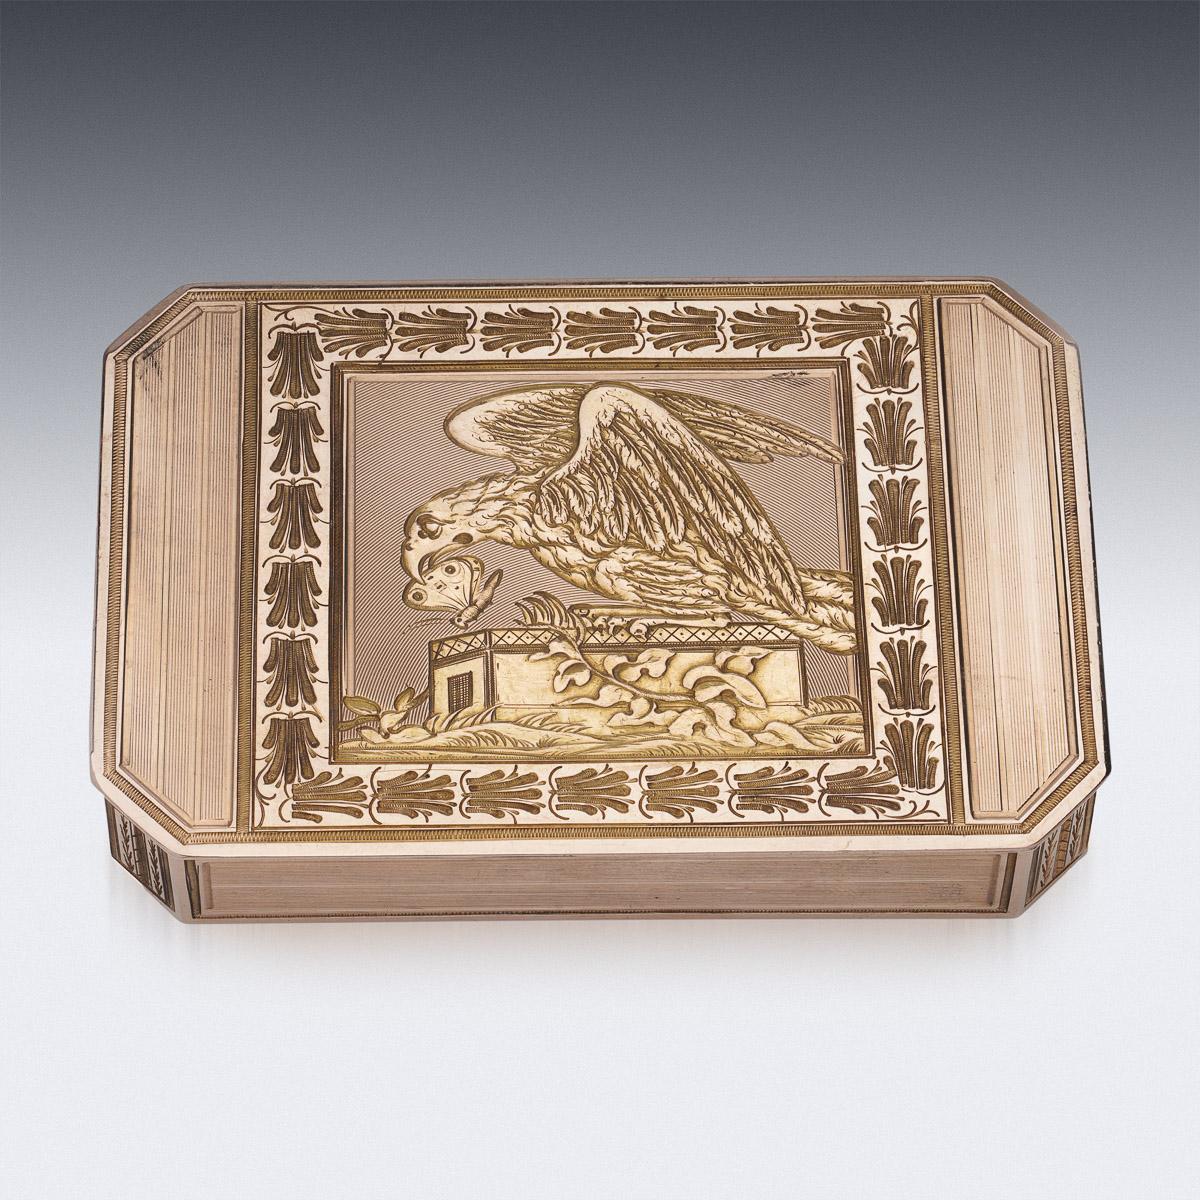 19th Century Austrian 18k gold snuff box, of rectangular form with cut corners, the hinged covers beautifully engraved with an eagle catching a butterfly, surrounded by floral border and engine turned decoration.
Hallmarked and gold tested, Makers